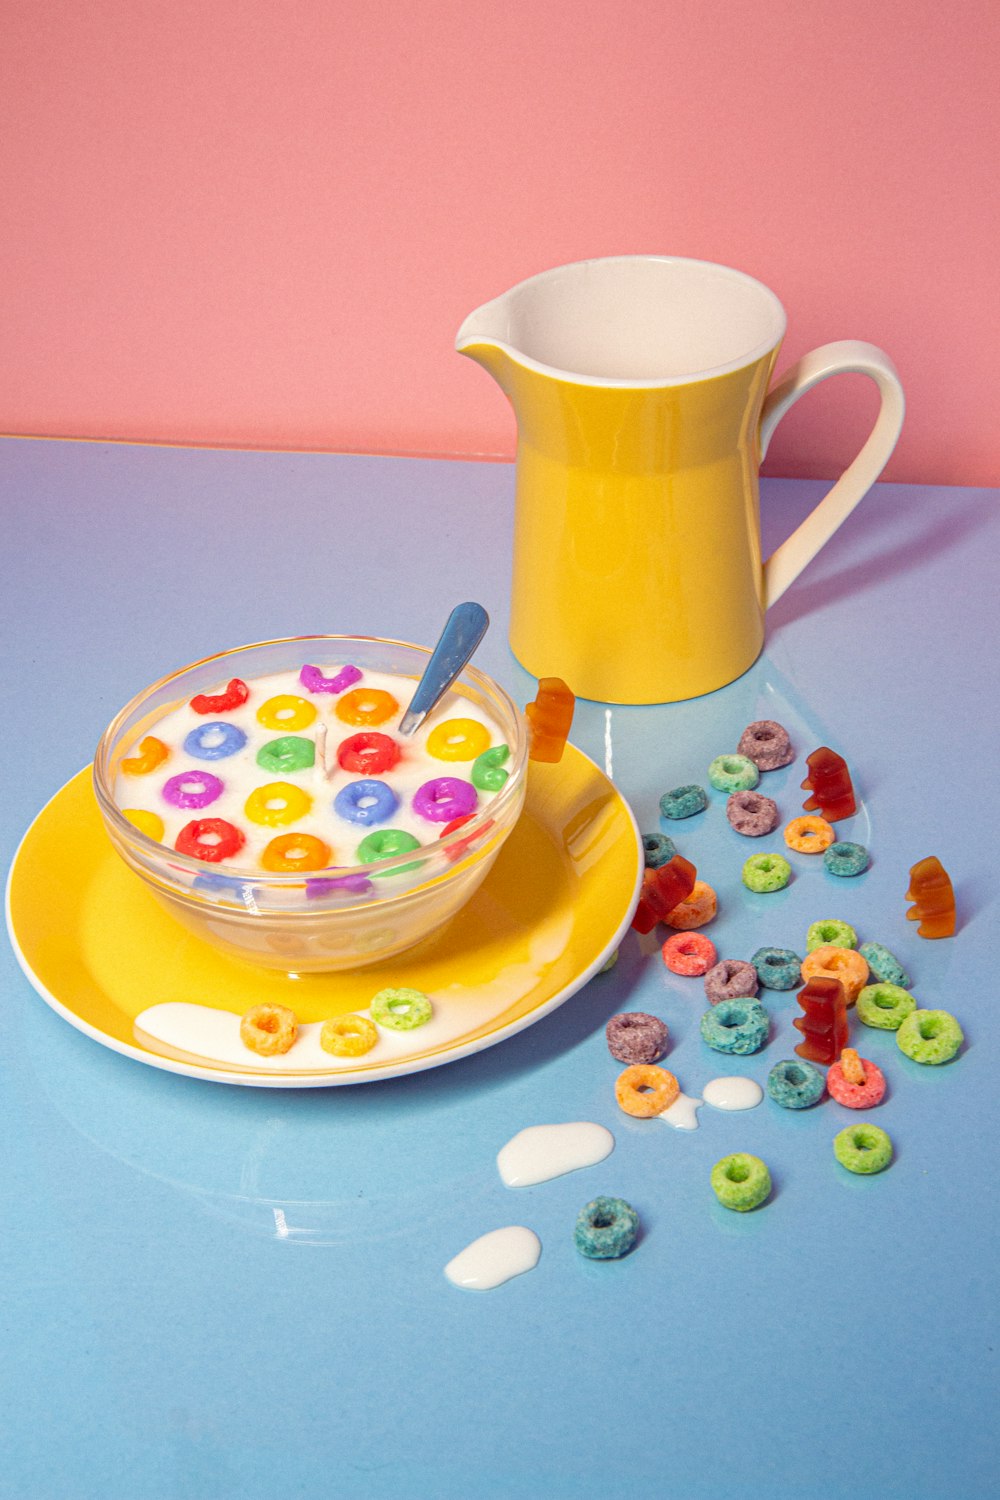 a bowl of cereal and a pitcher of cereal on a table